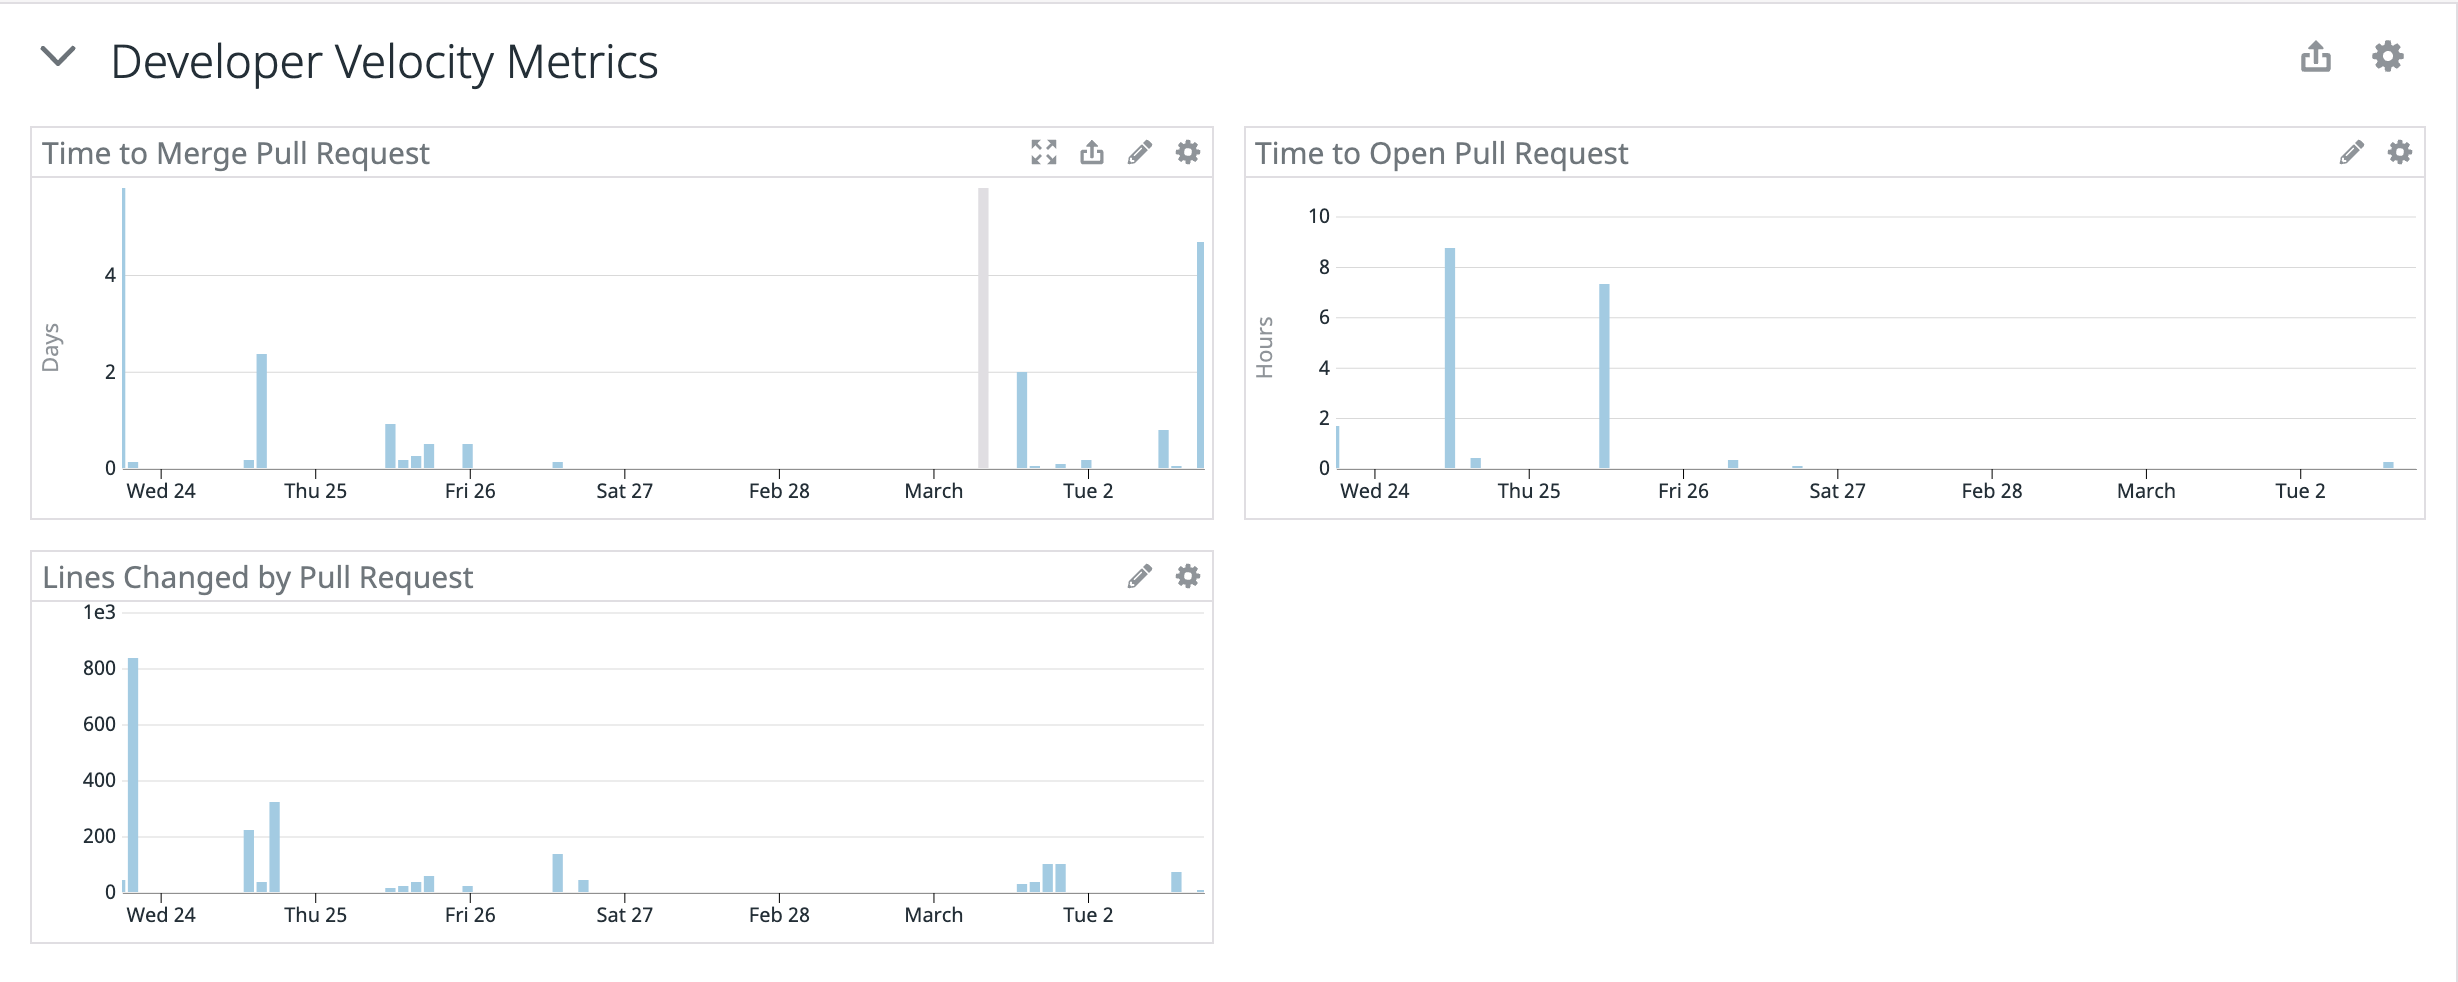 Three graphs showing the data for time to merge and open pull requests, and lines changed per pull request